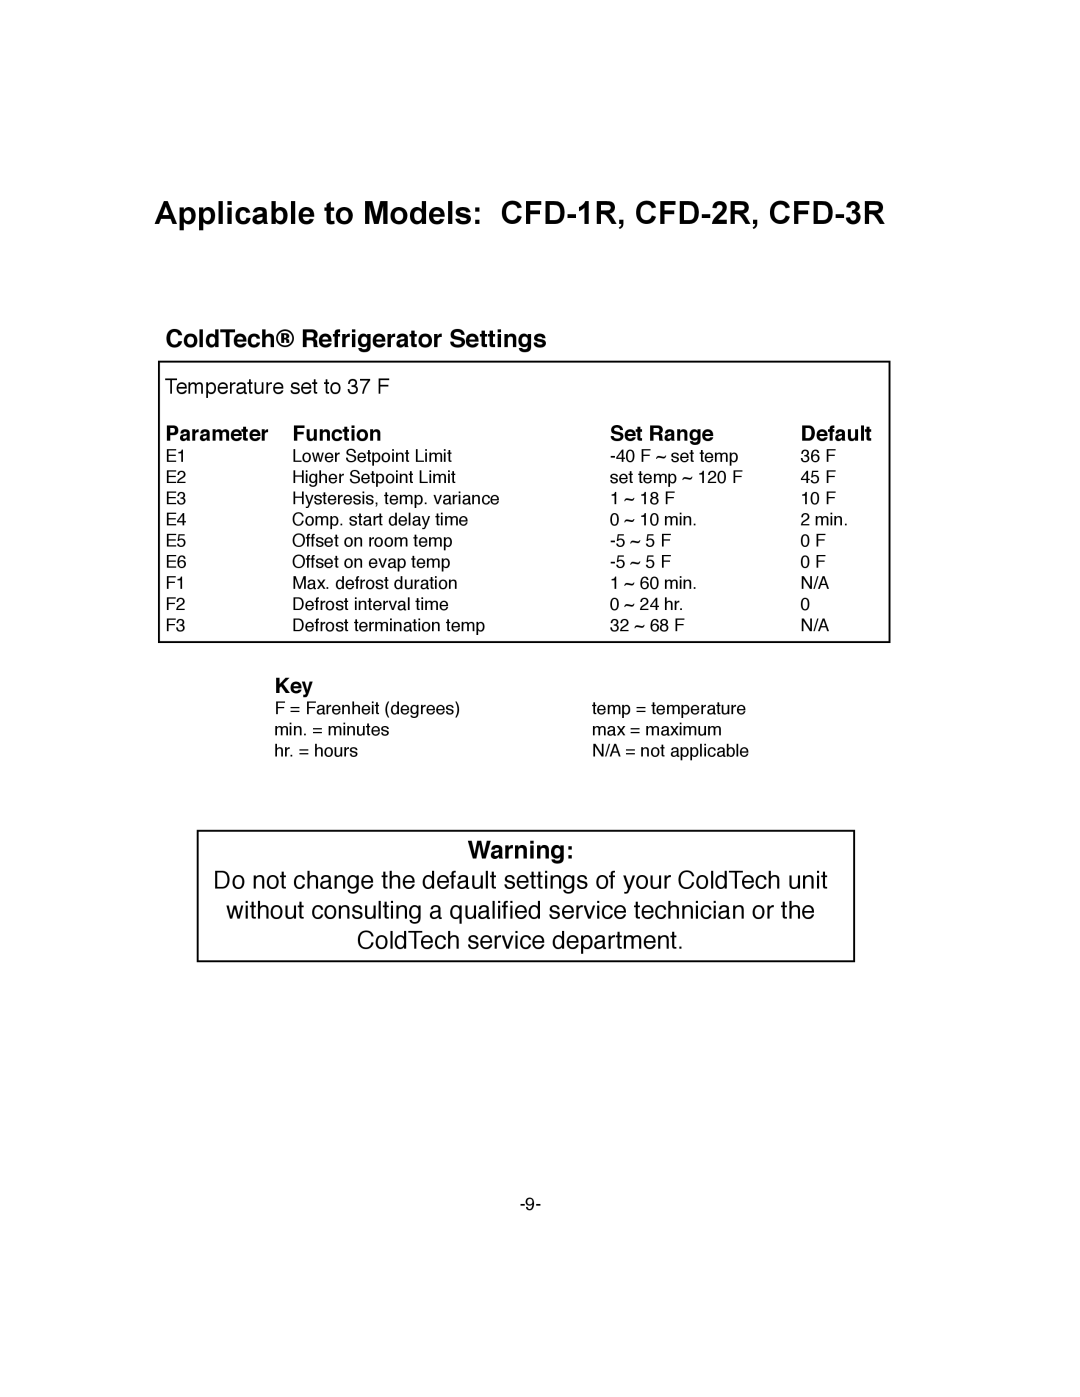 ColdTech CFD-1F Applicable to Models: CFD-1R, CFD-2R, CFD-3R, ColdTech Refrigerator Settings, Temperature set to 37 F 